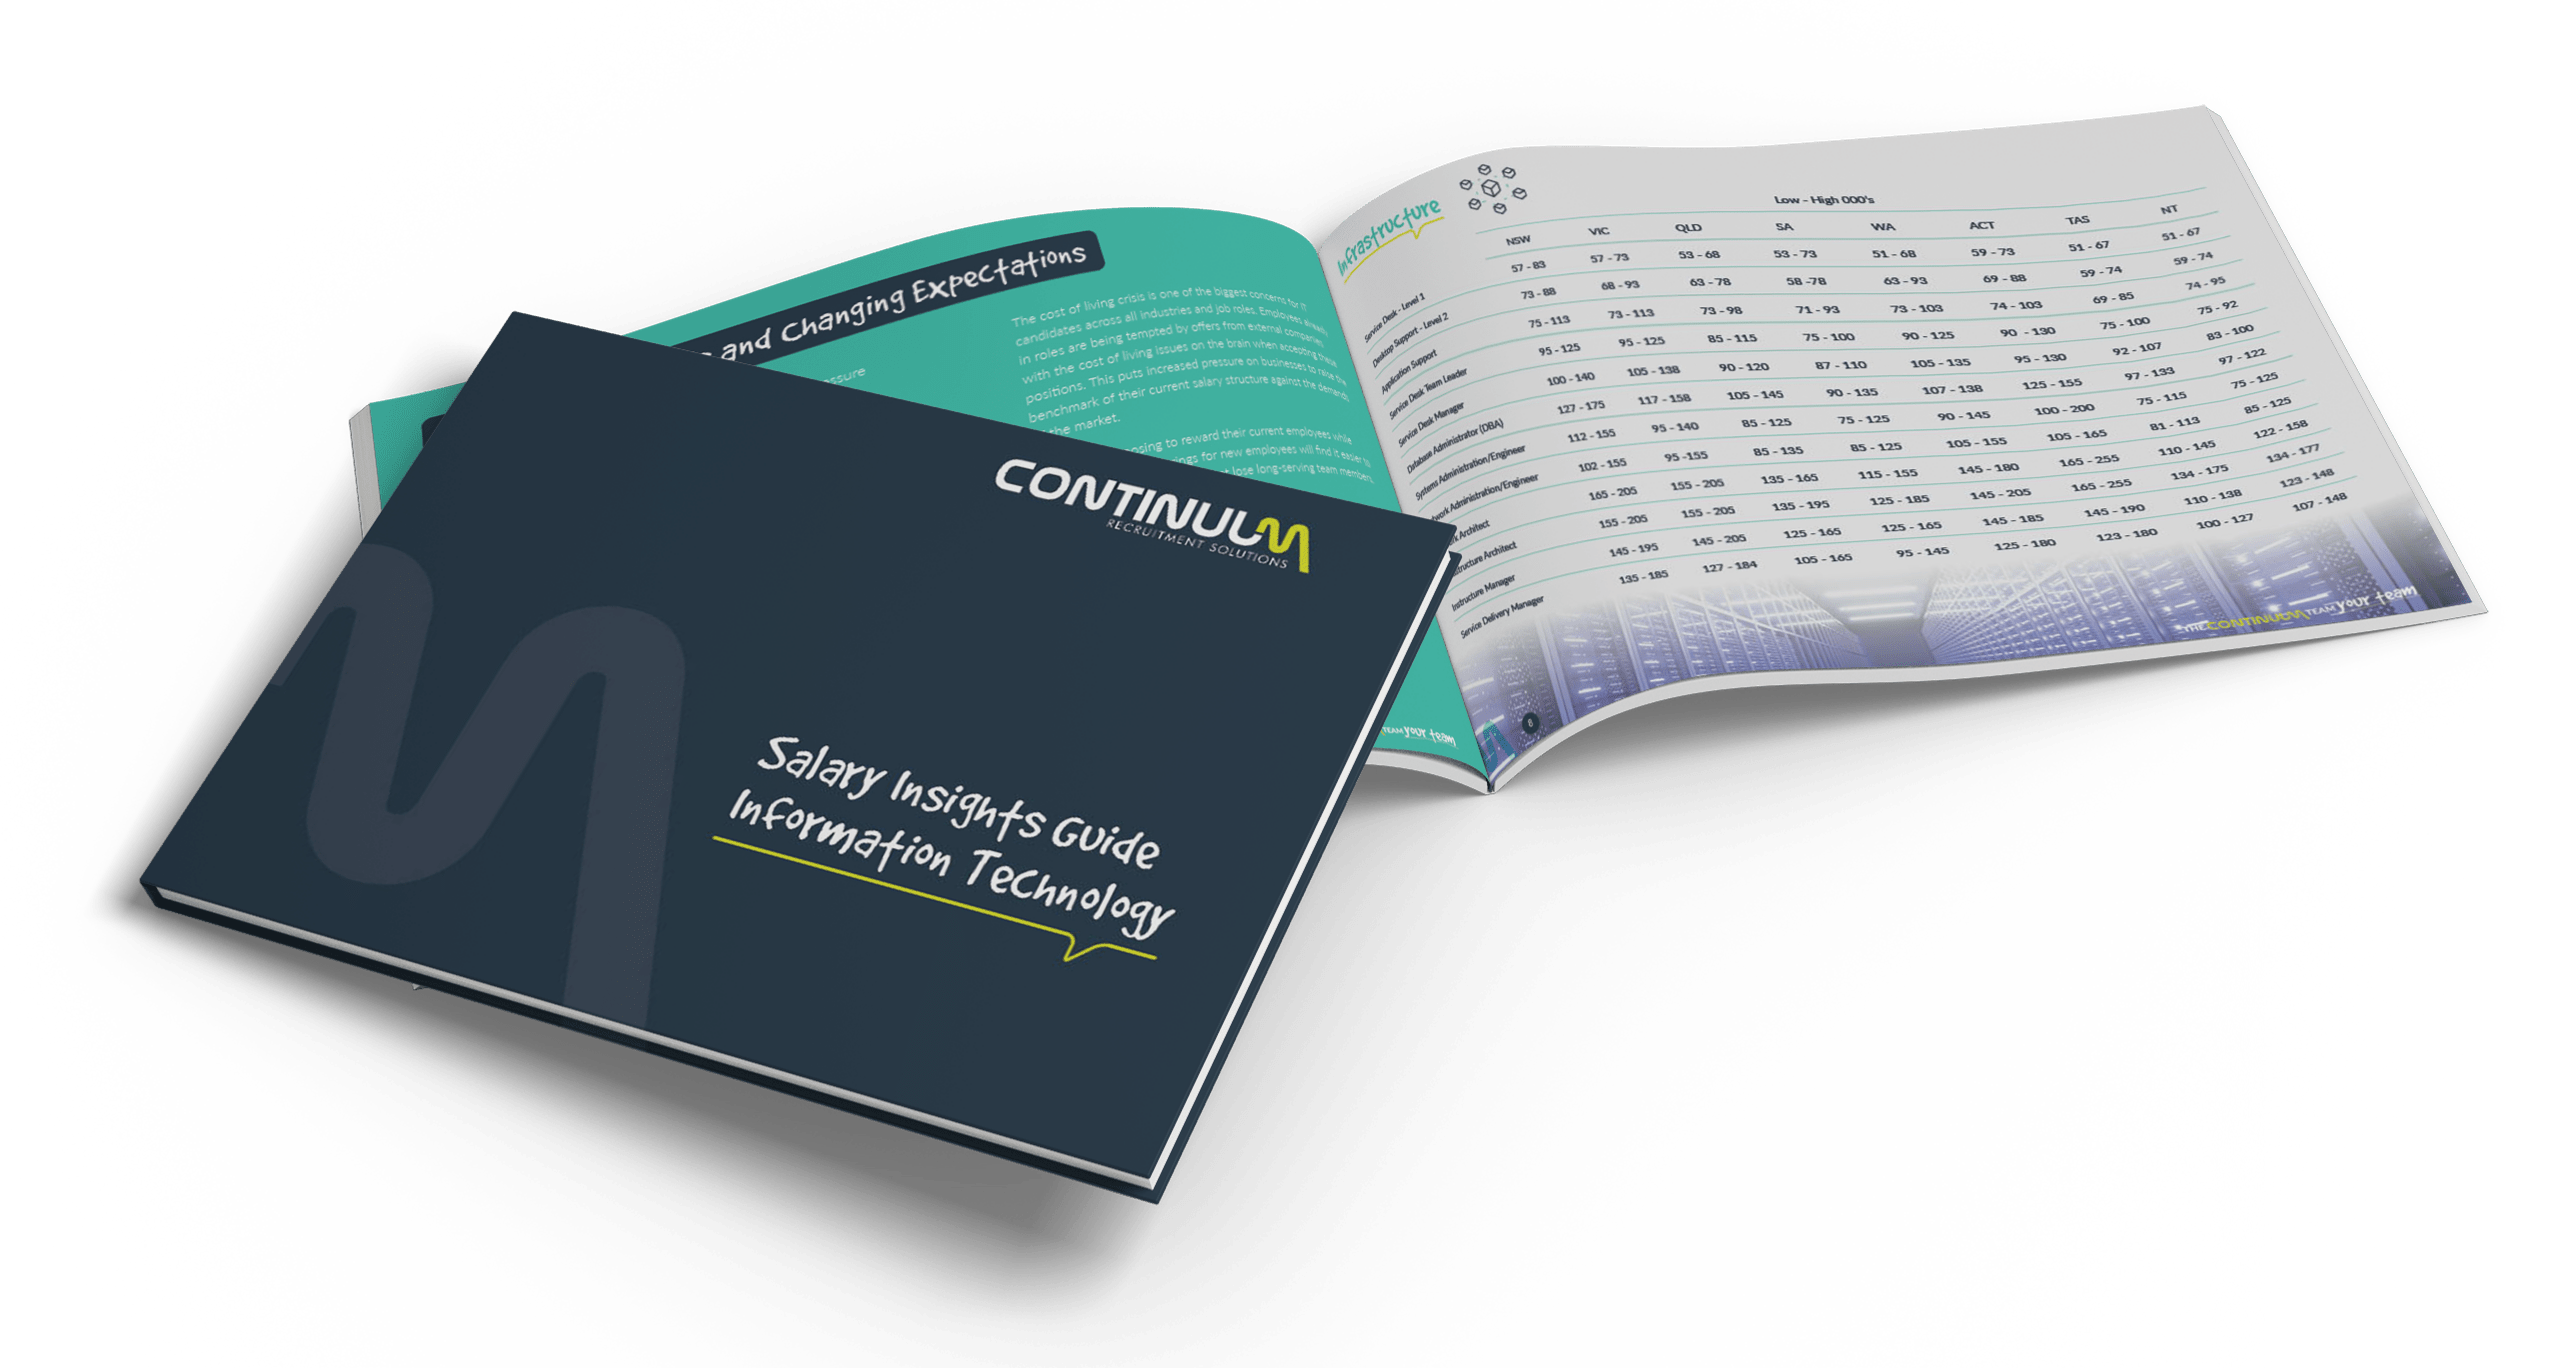 IT Salary Insight Guide 2023 Continuum Recruitment Solutions